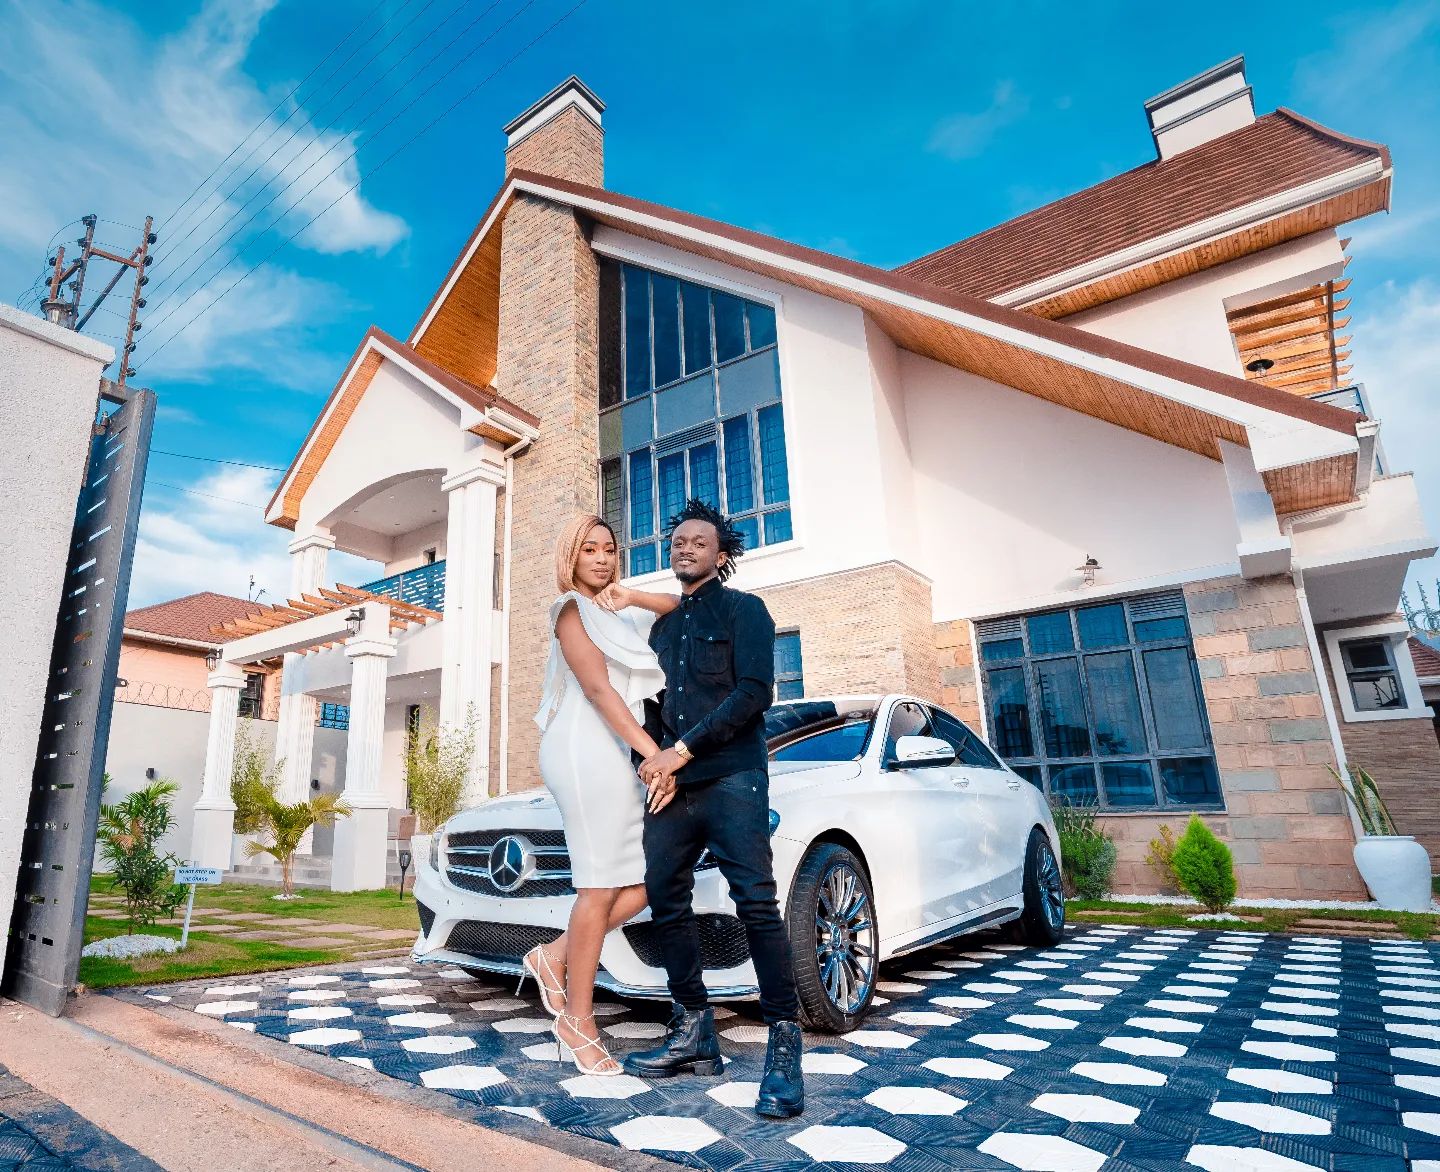 Bahati And Diana Marua Move Into Their Ksh27.5 Million Mansion After Brouhaha Over The House's Ownership